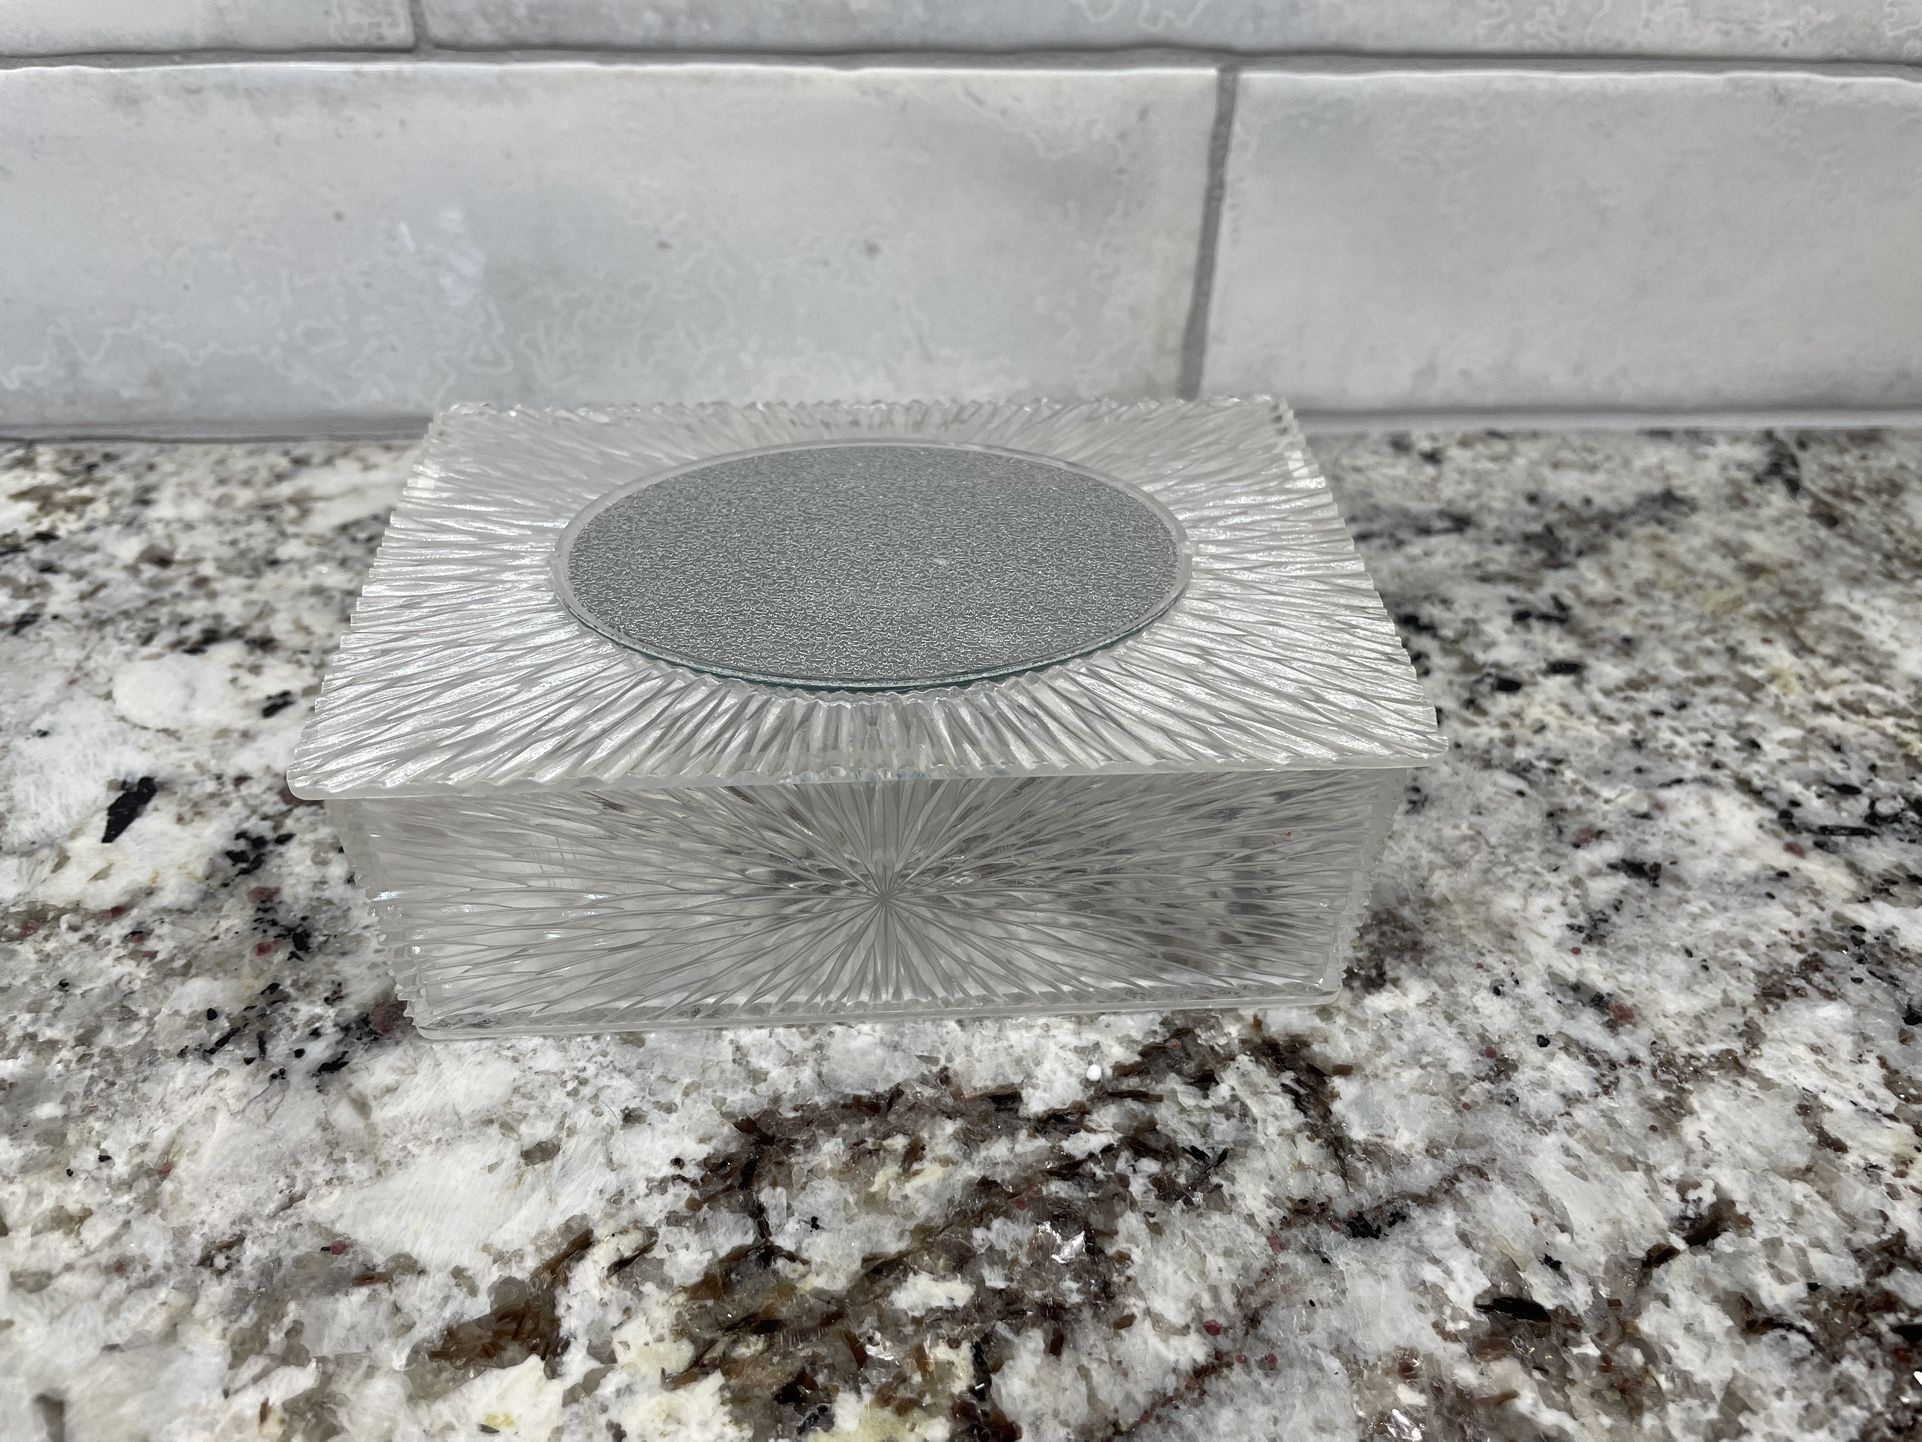 Etched Jewelry Box